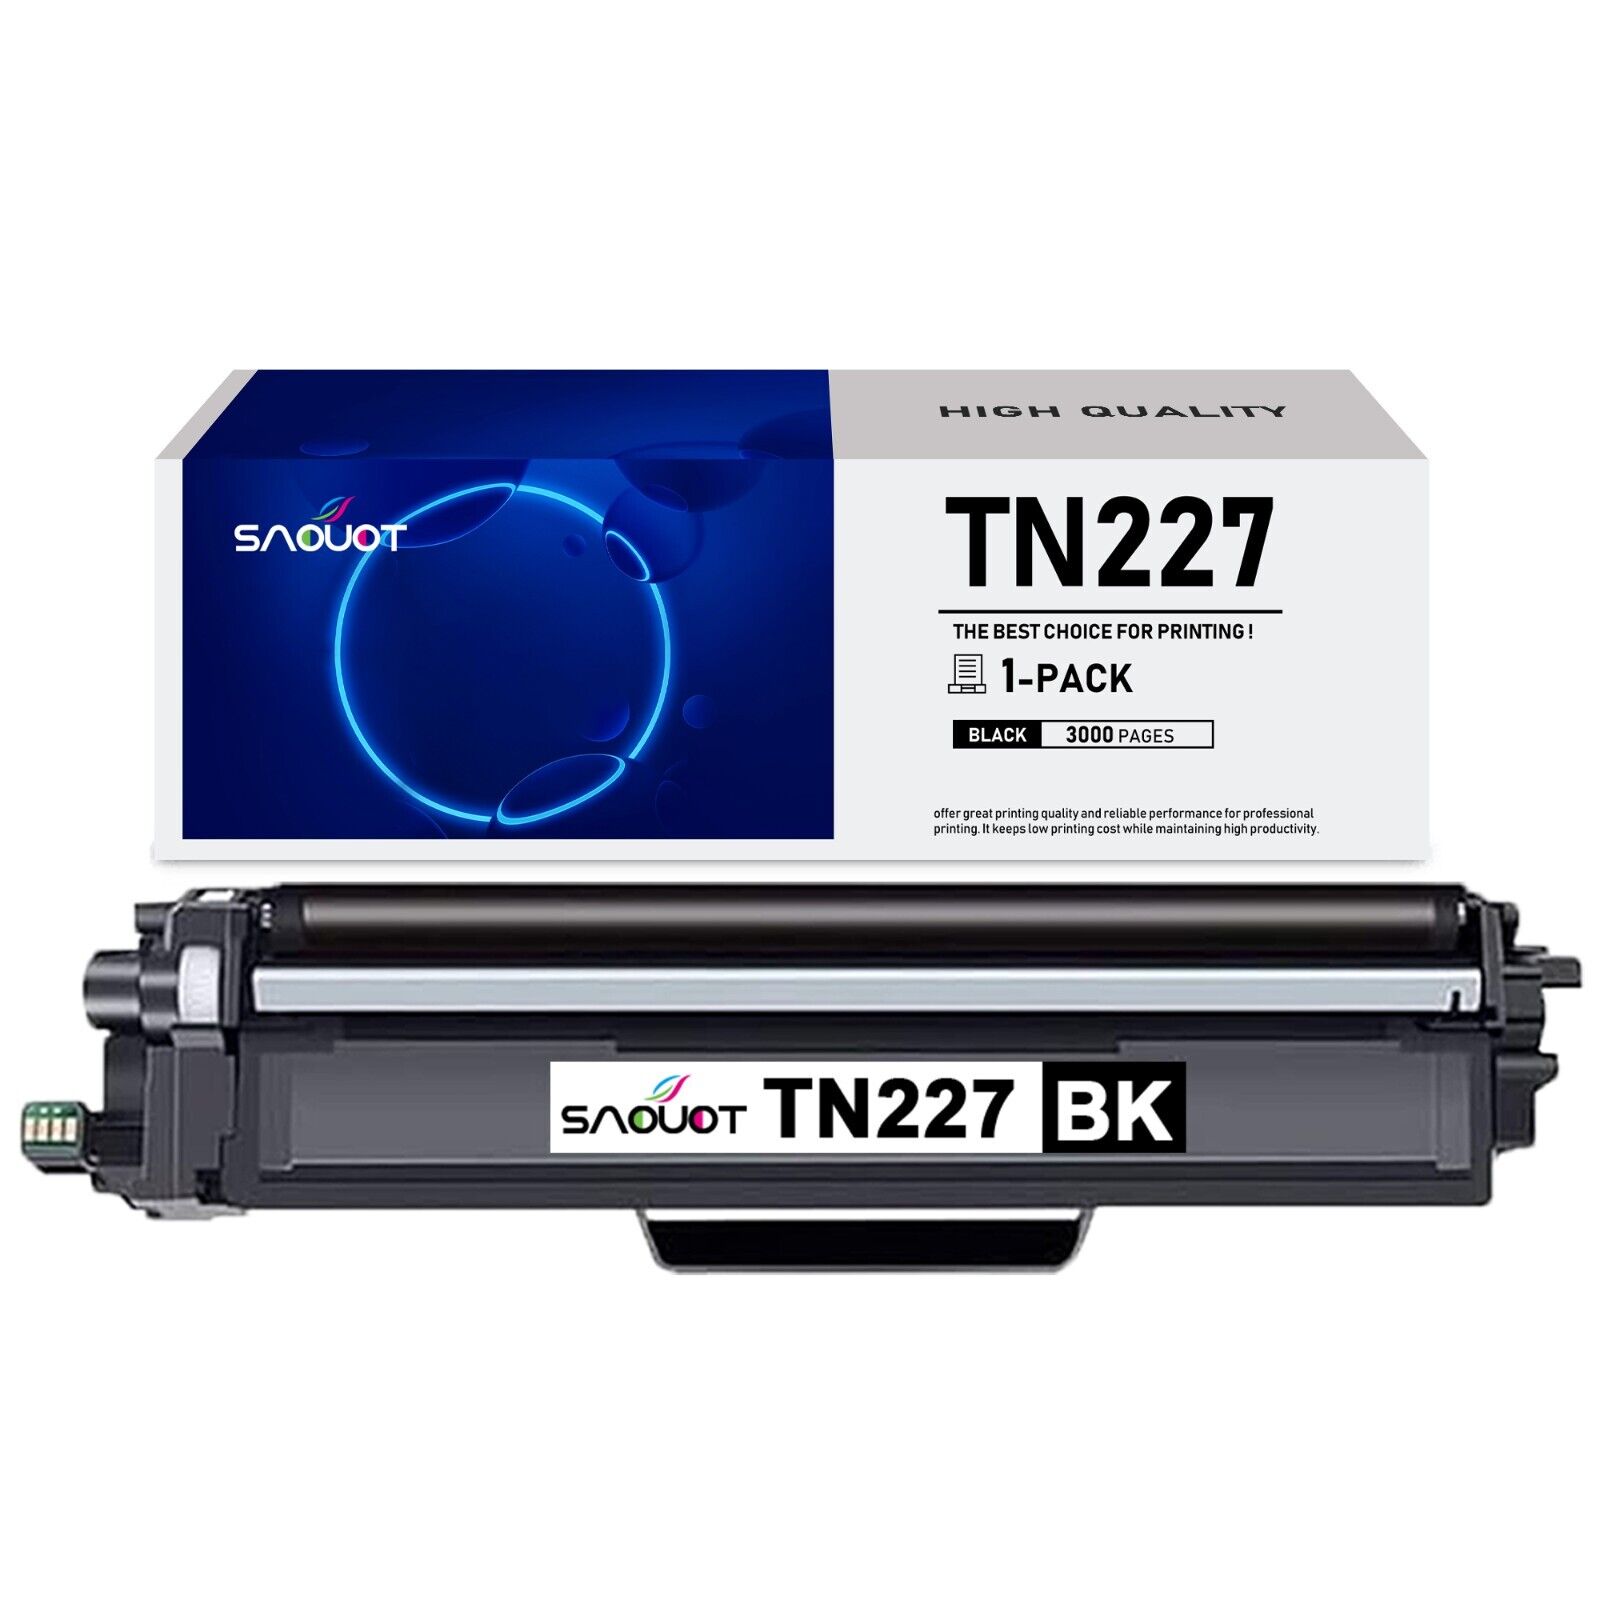 TN227 Toner Cartridge Replacement for Brother TN227 MFC-L3770CDW MFC-L3710CW